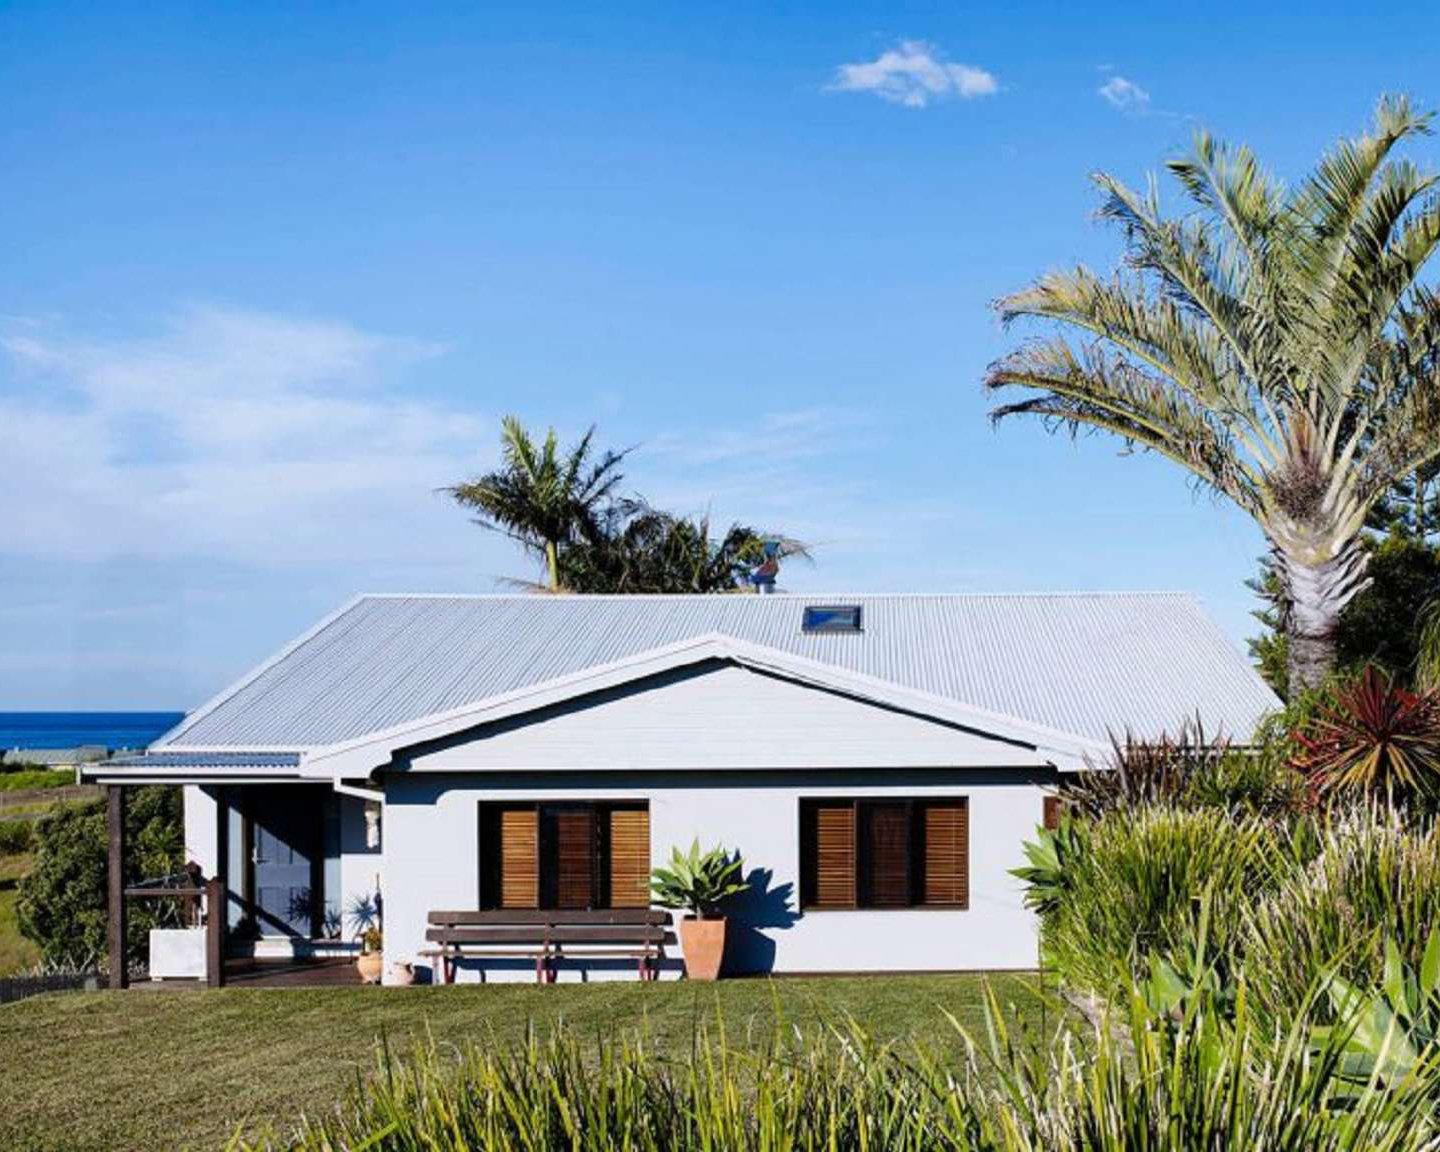 A central coast property which is some of the best accommodation on the Central Coast